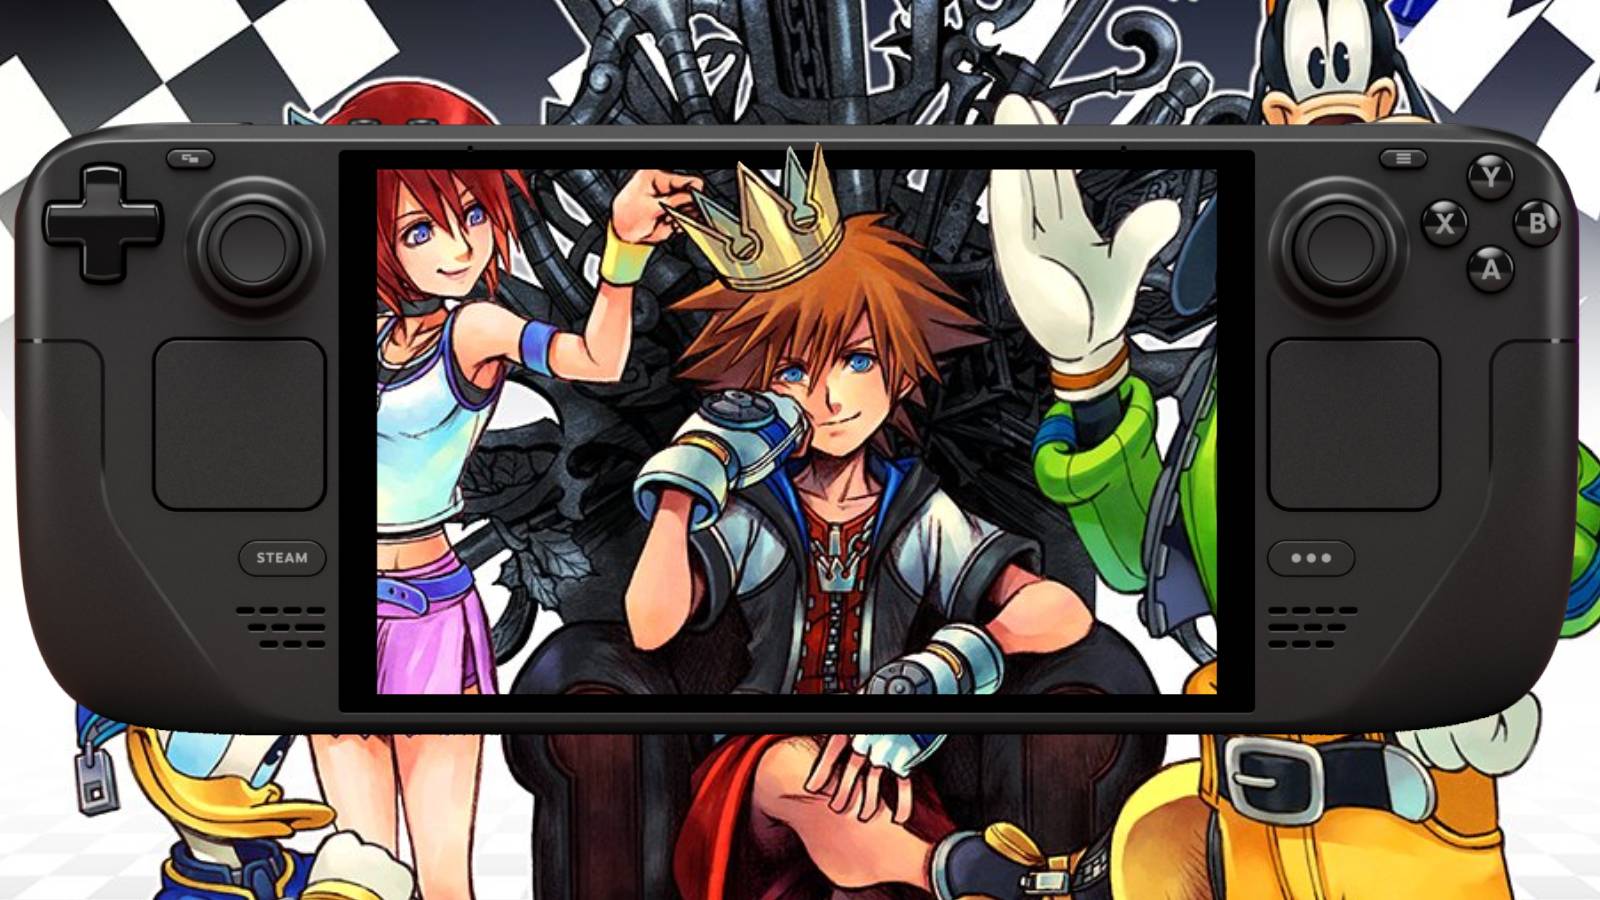 Key-art of Kingdom Hearts on the screen of a Steam Deck.